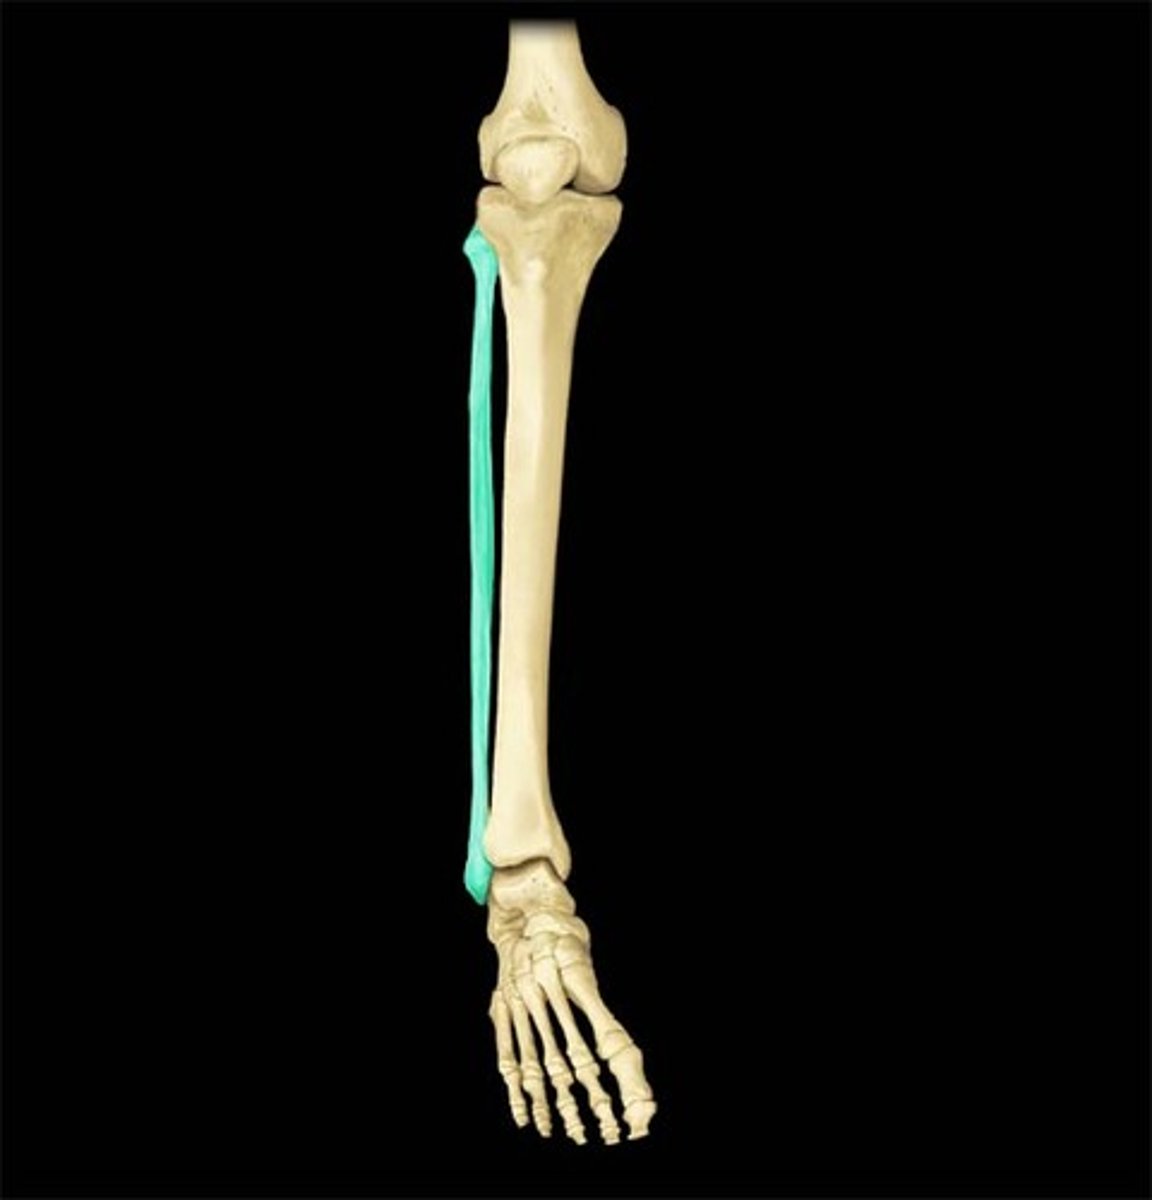 <p>The lateral and smaller bone of the lower leg</p>